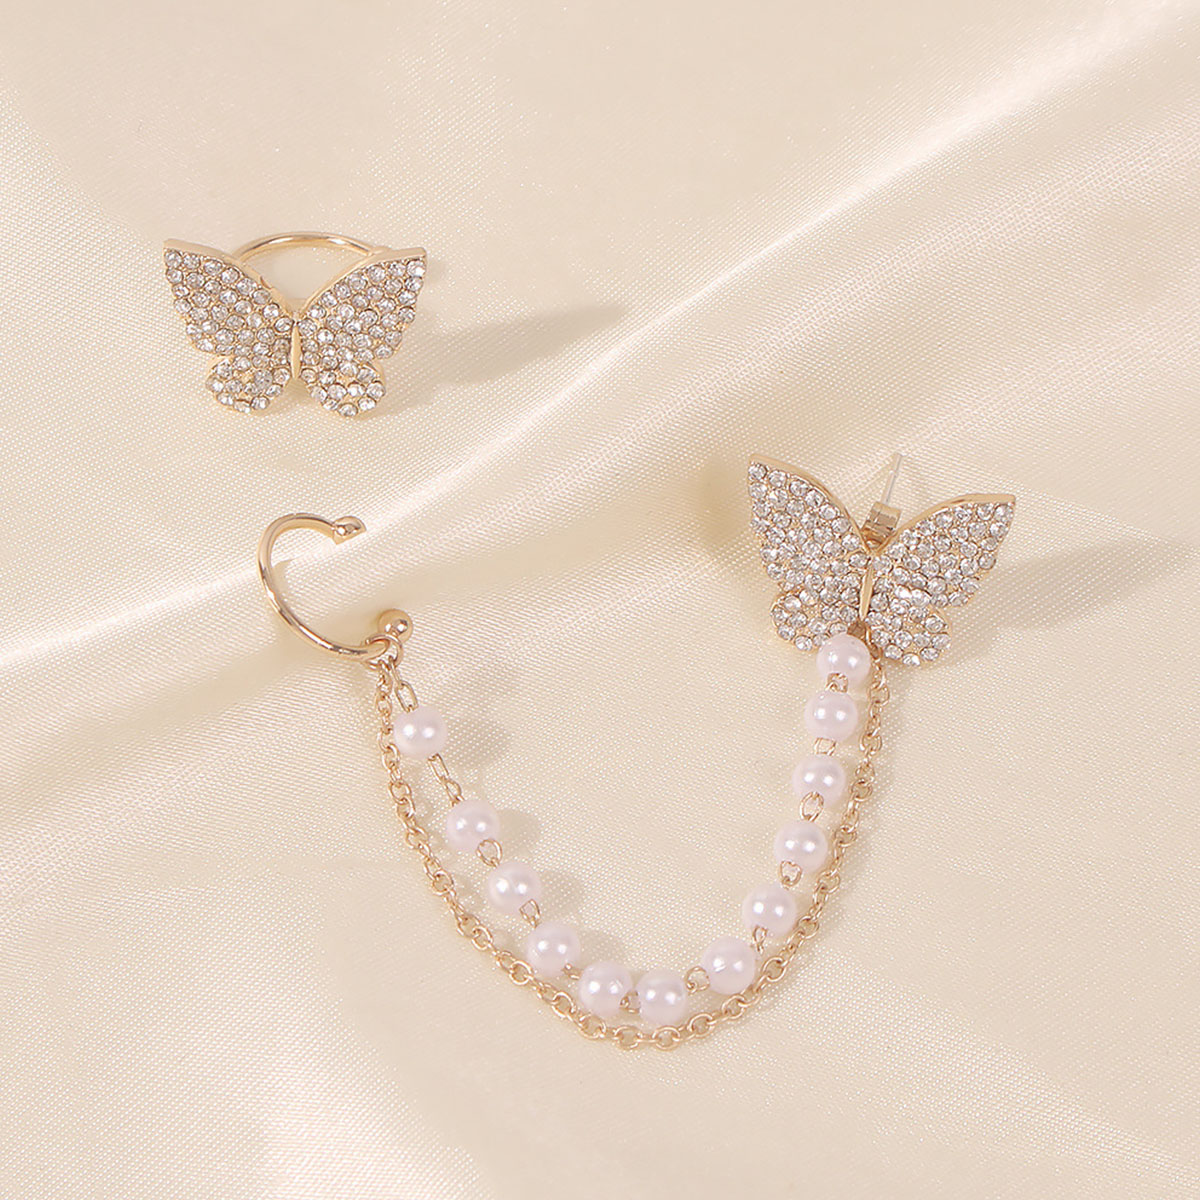 European and American style new fashion earrings butterfly pearl earrings female personality diamond allmatch jewelry earringspicture4